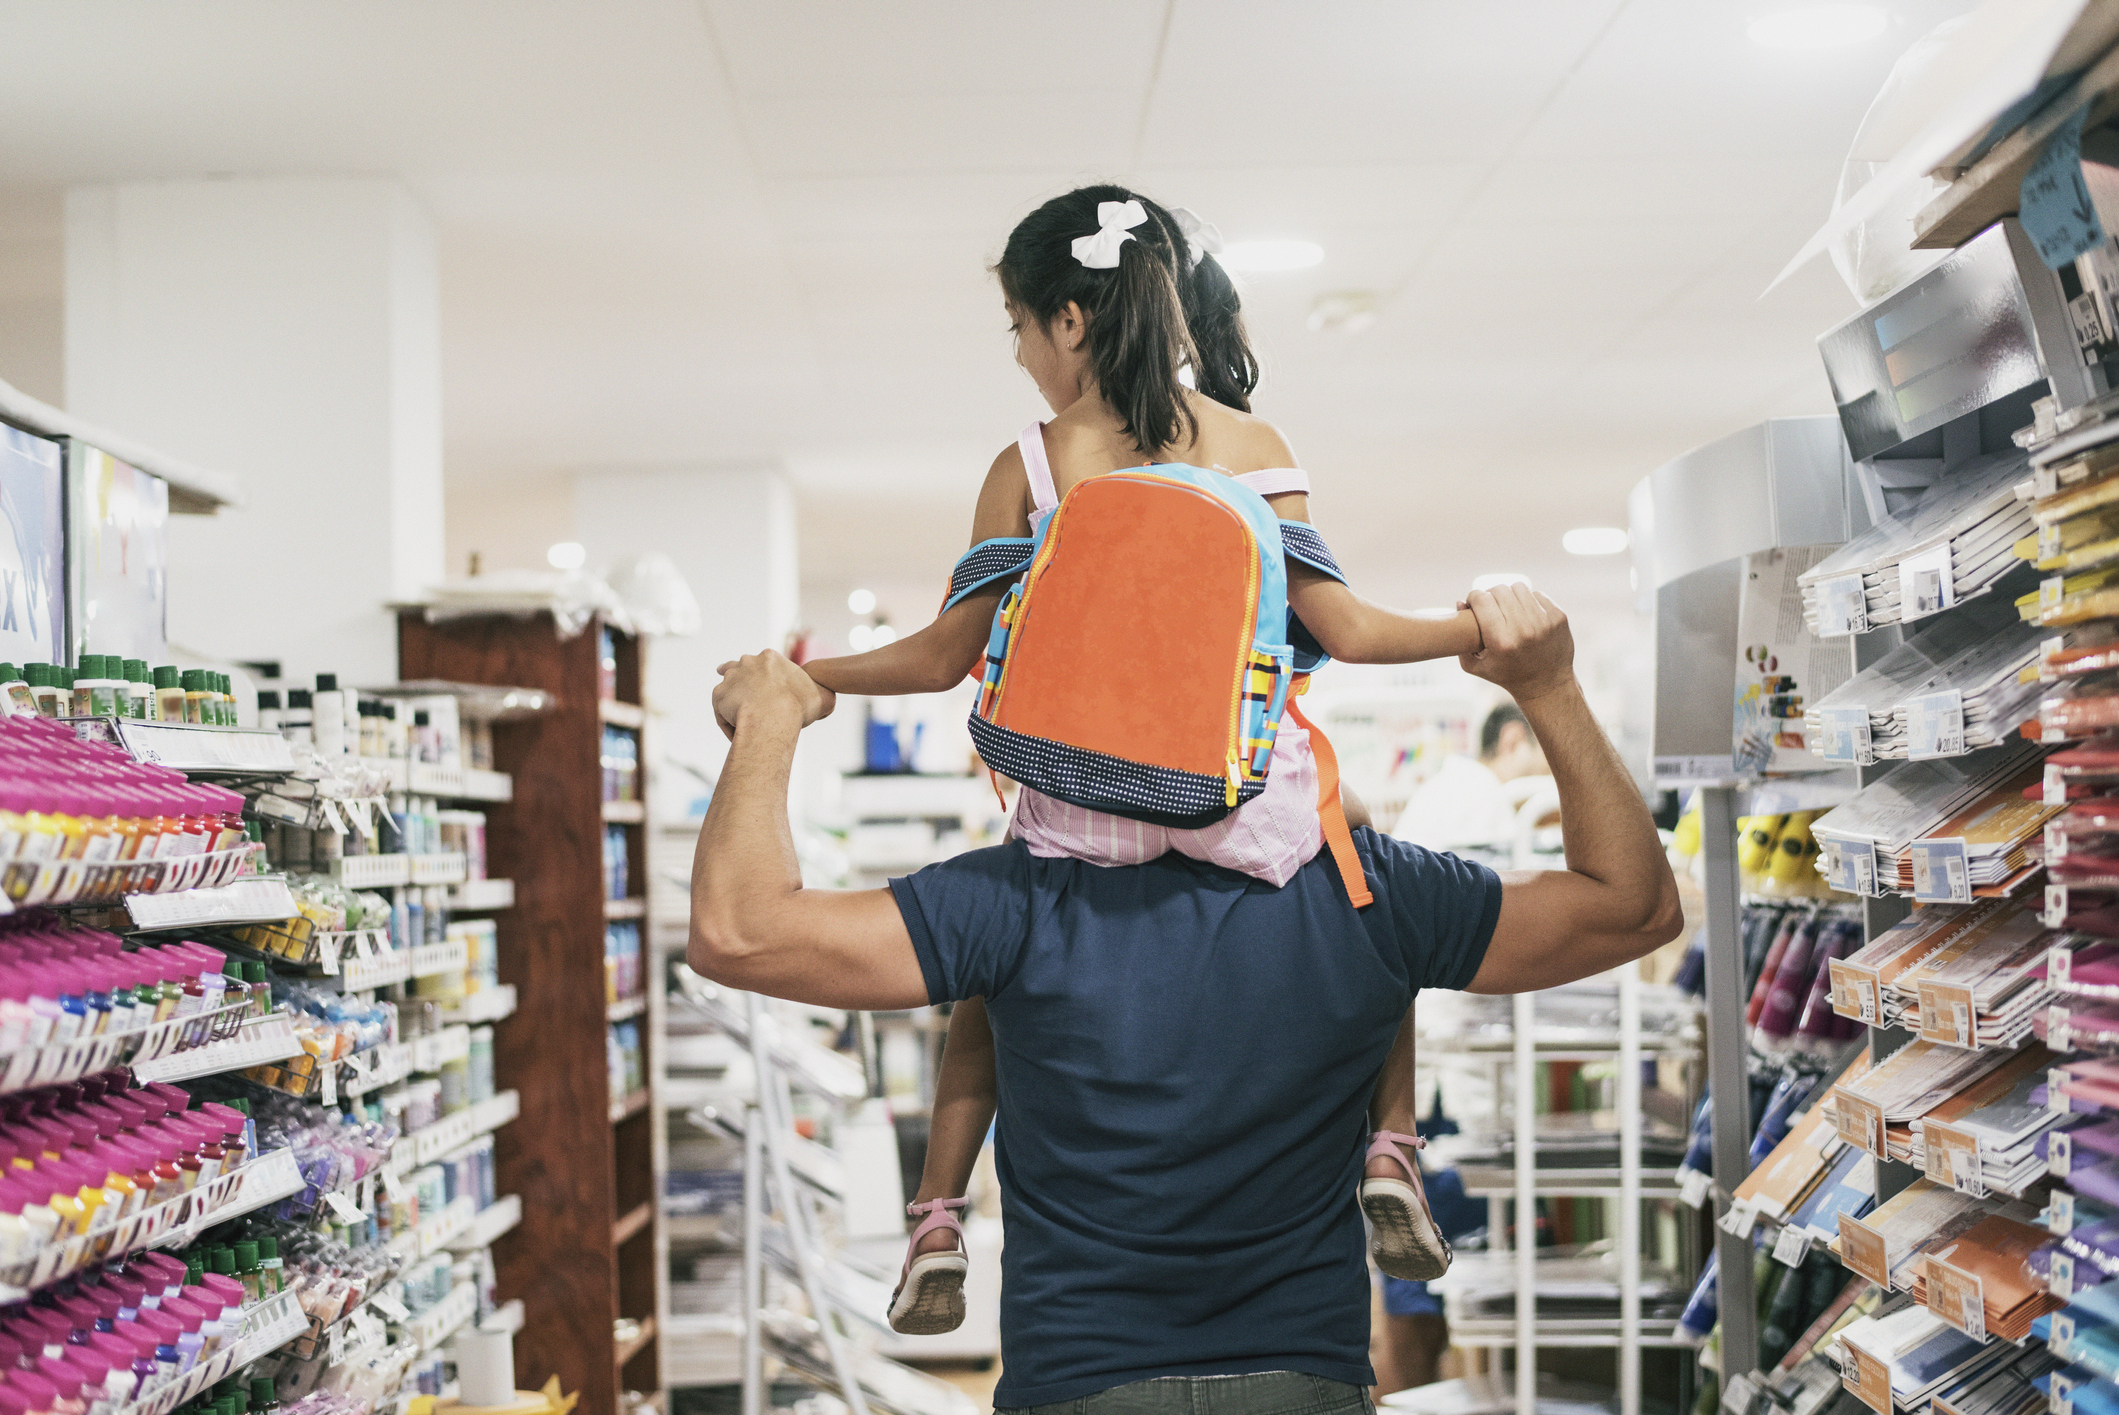 Father and daughter buying school supplies preparing to go back to school, on shoulders